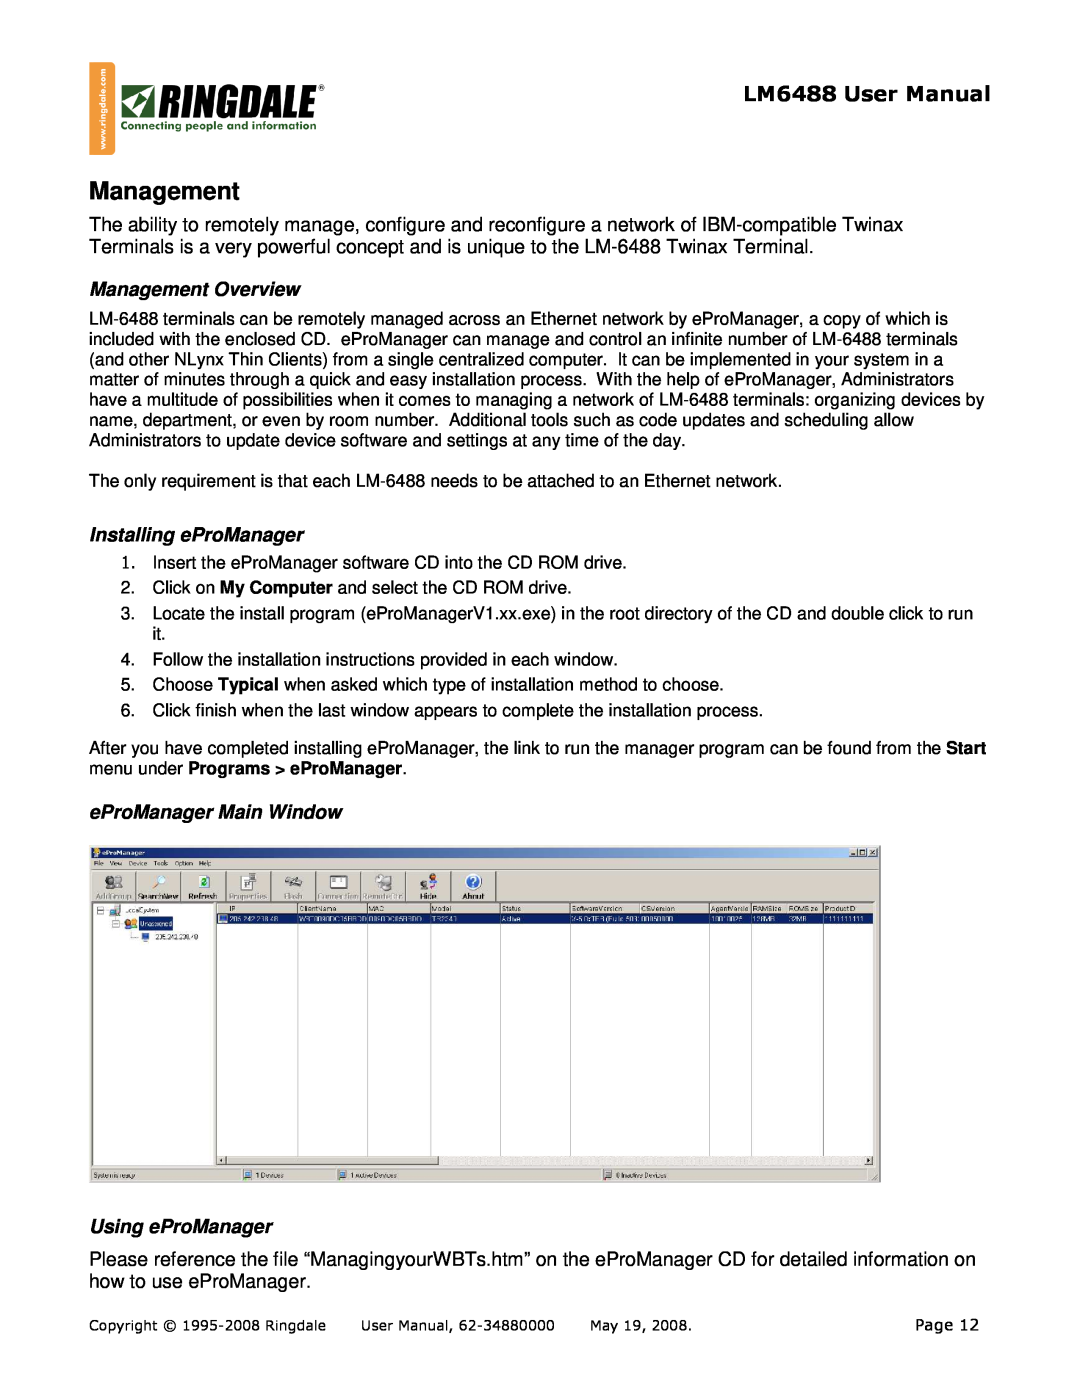 Ringdale LM-6488 user manual Management Overview, Installing eProManager, eProManager Main Window Using eProManager 